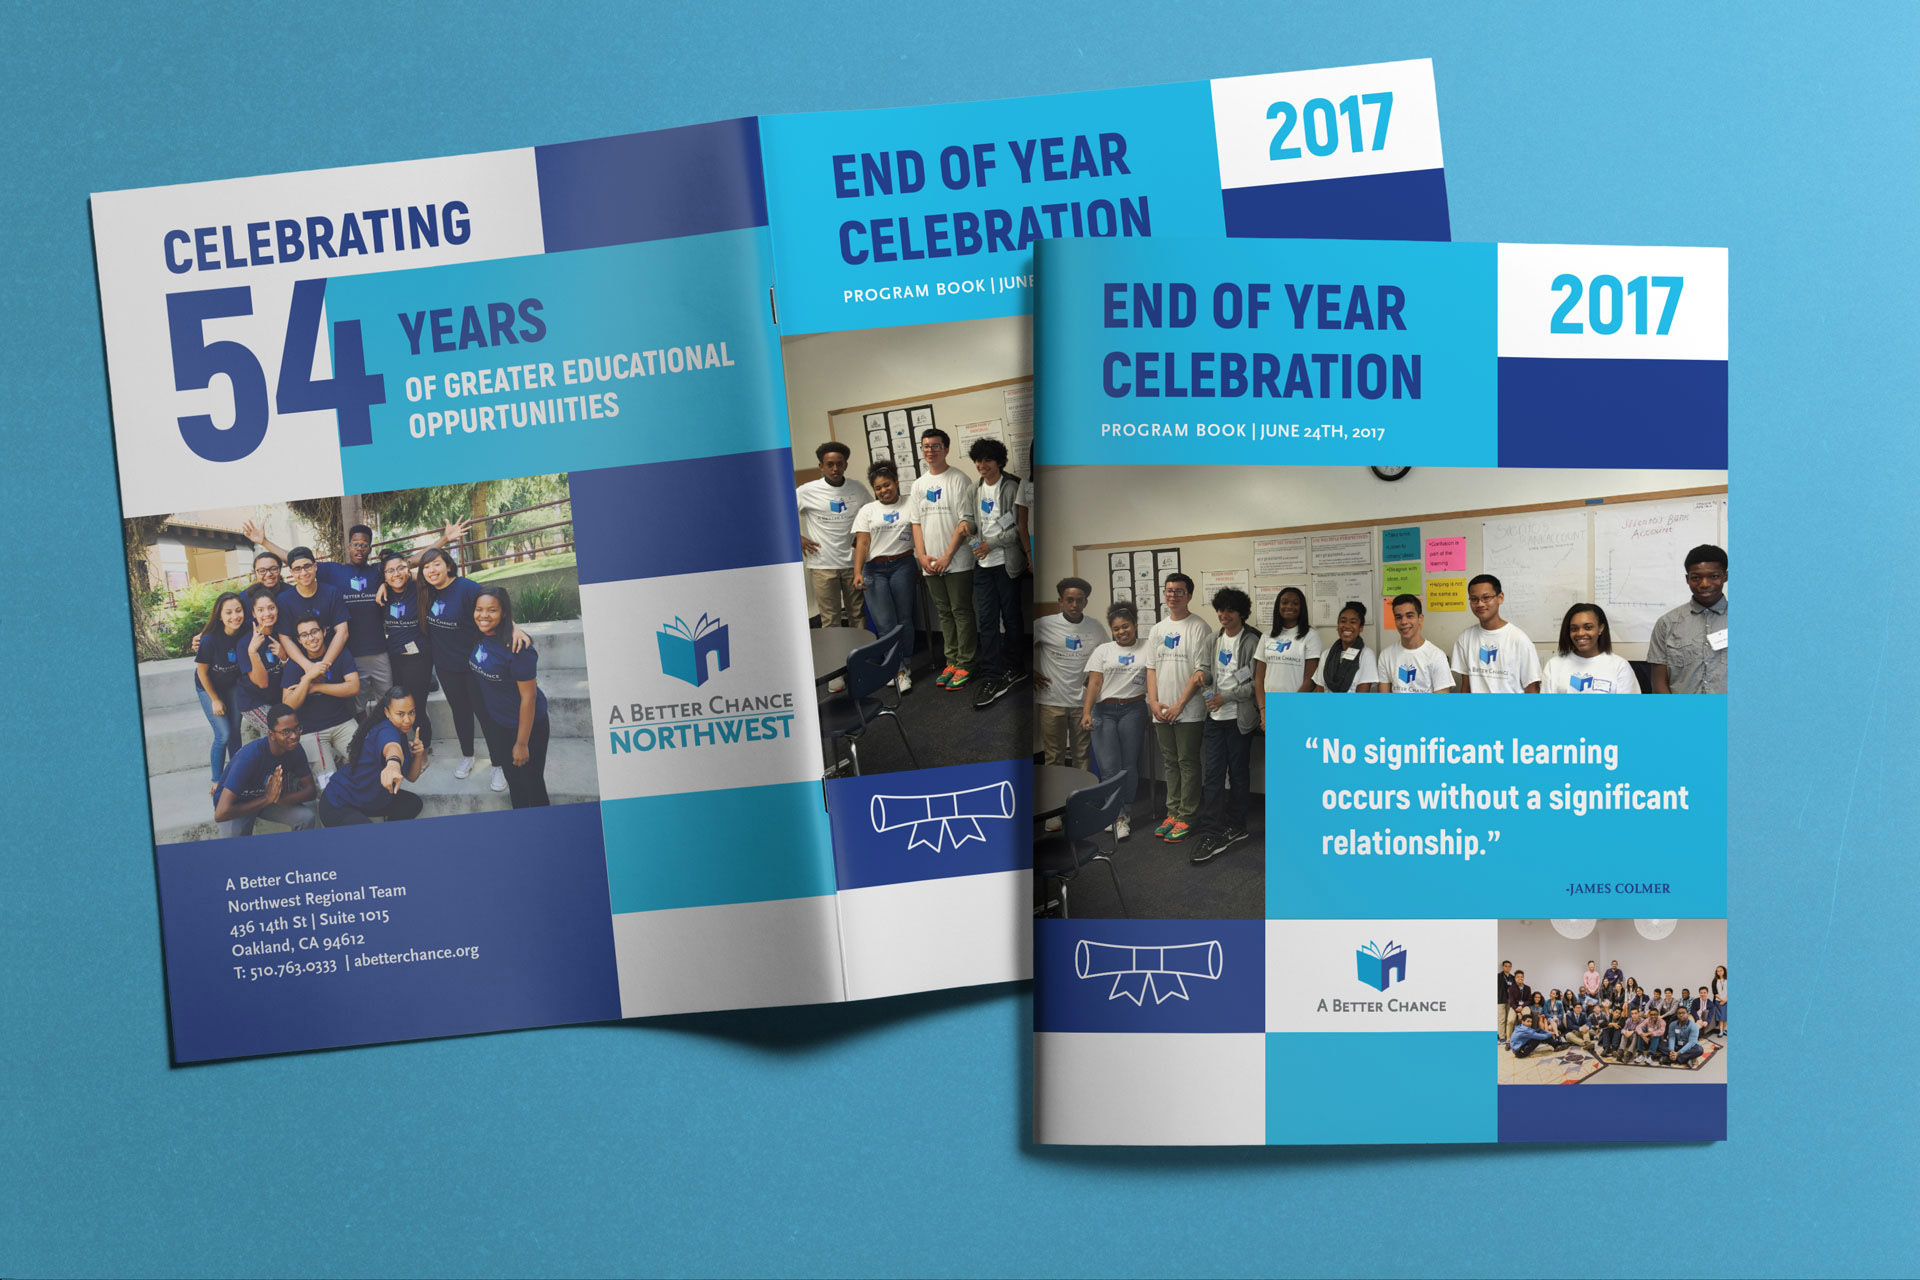 A Better Chance's 2017 EOYC Program Book front and back covers